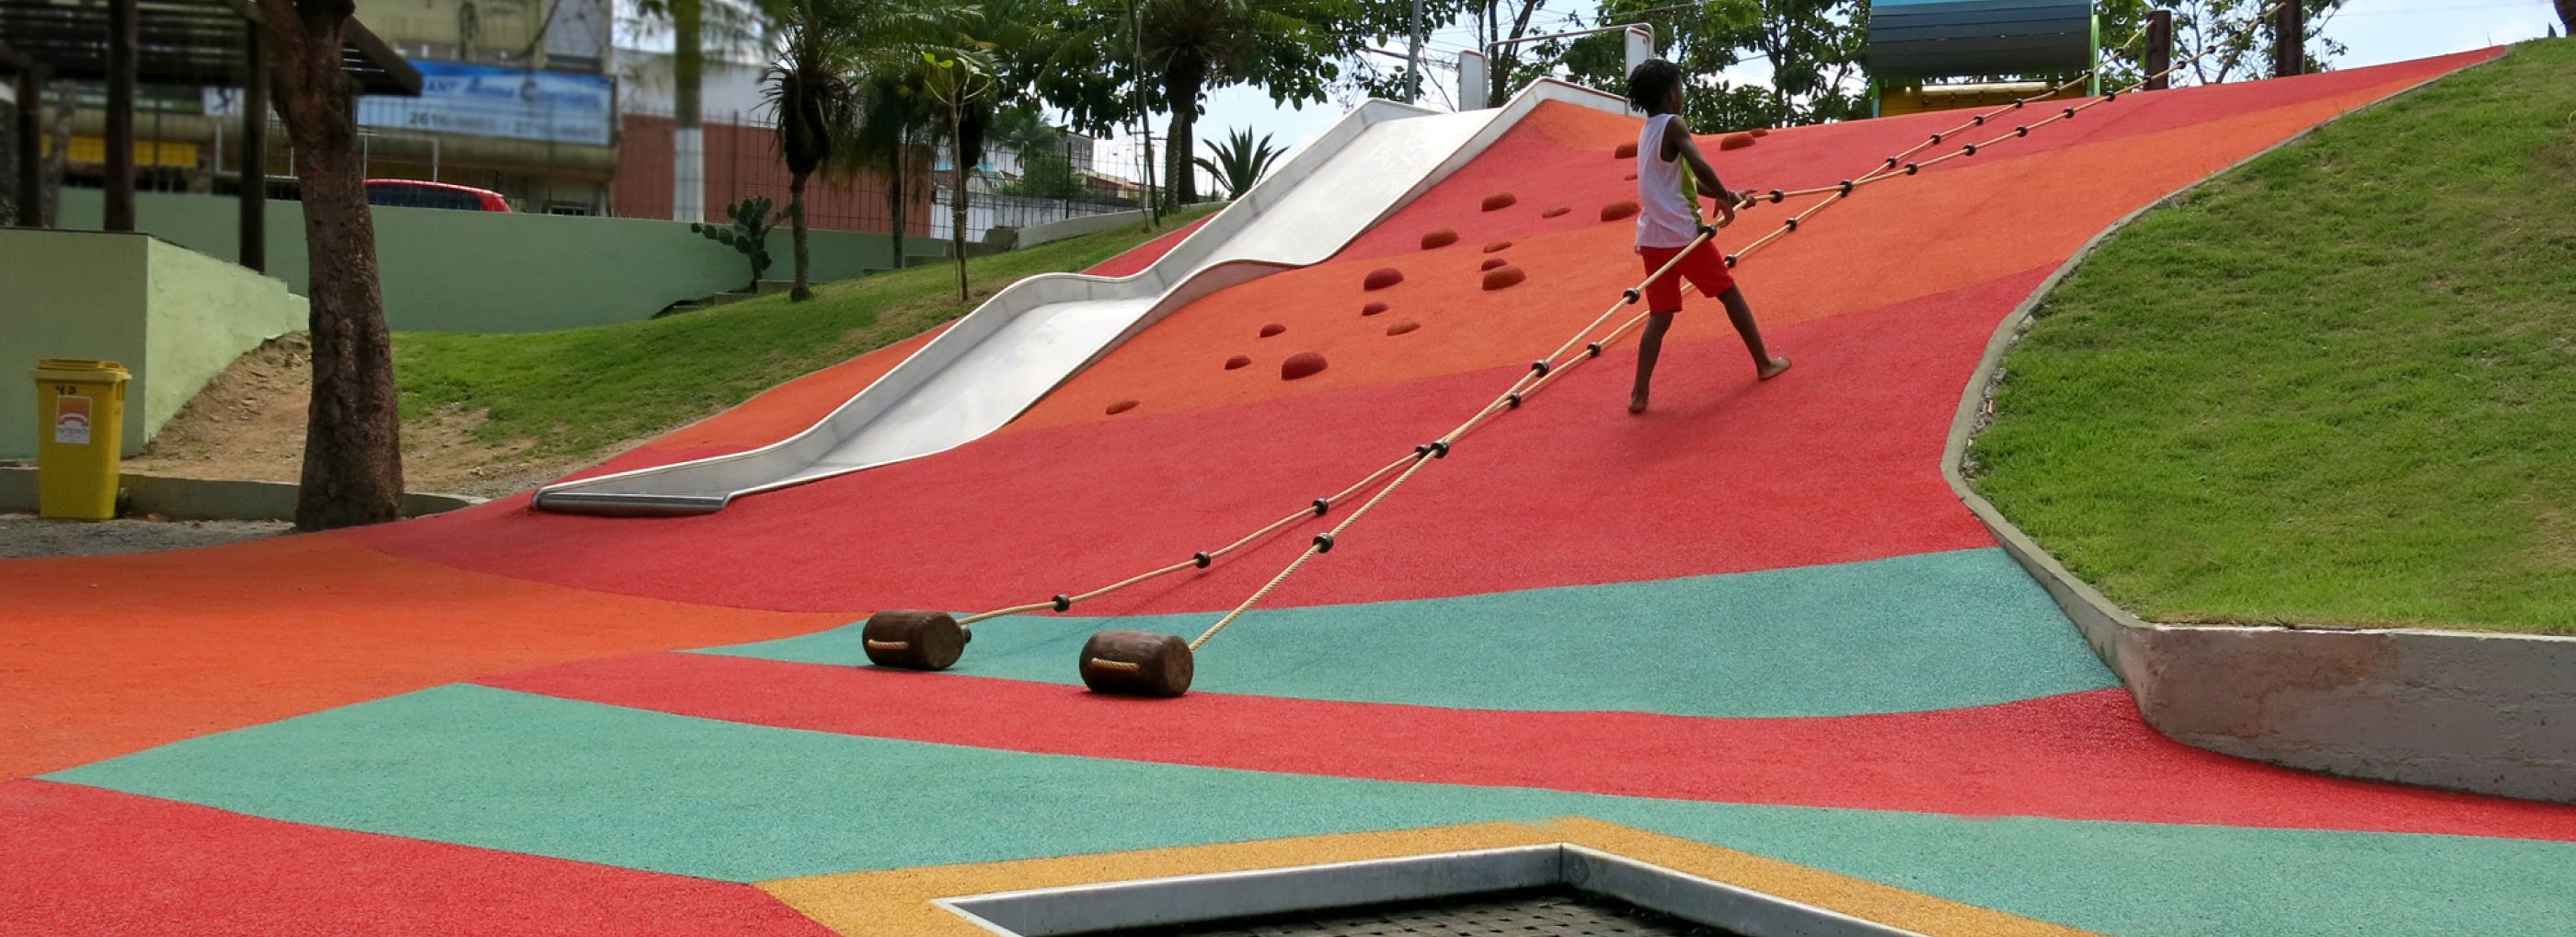 A kid climbing up a hill that has been covered in a colourful rubber flooring.